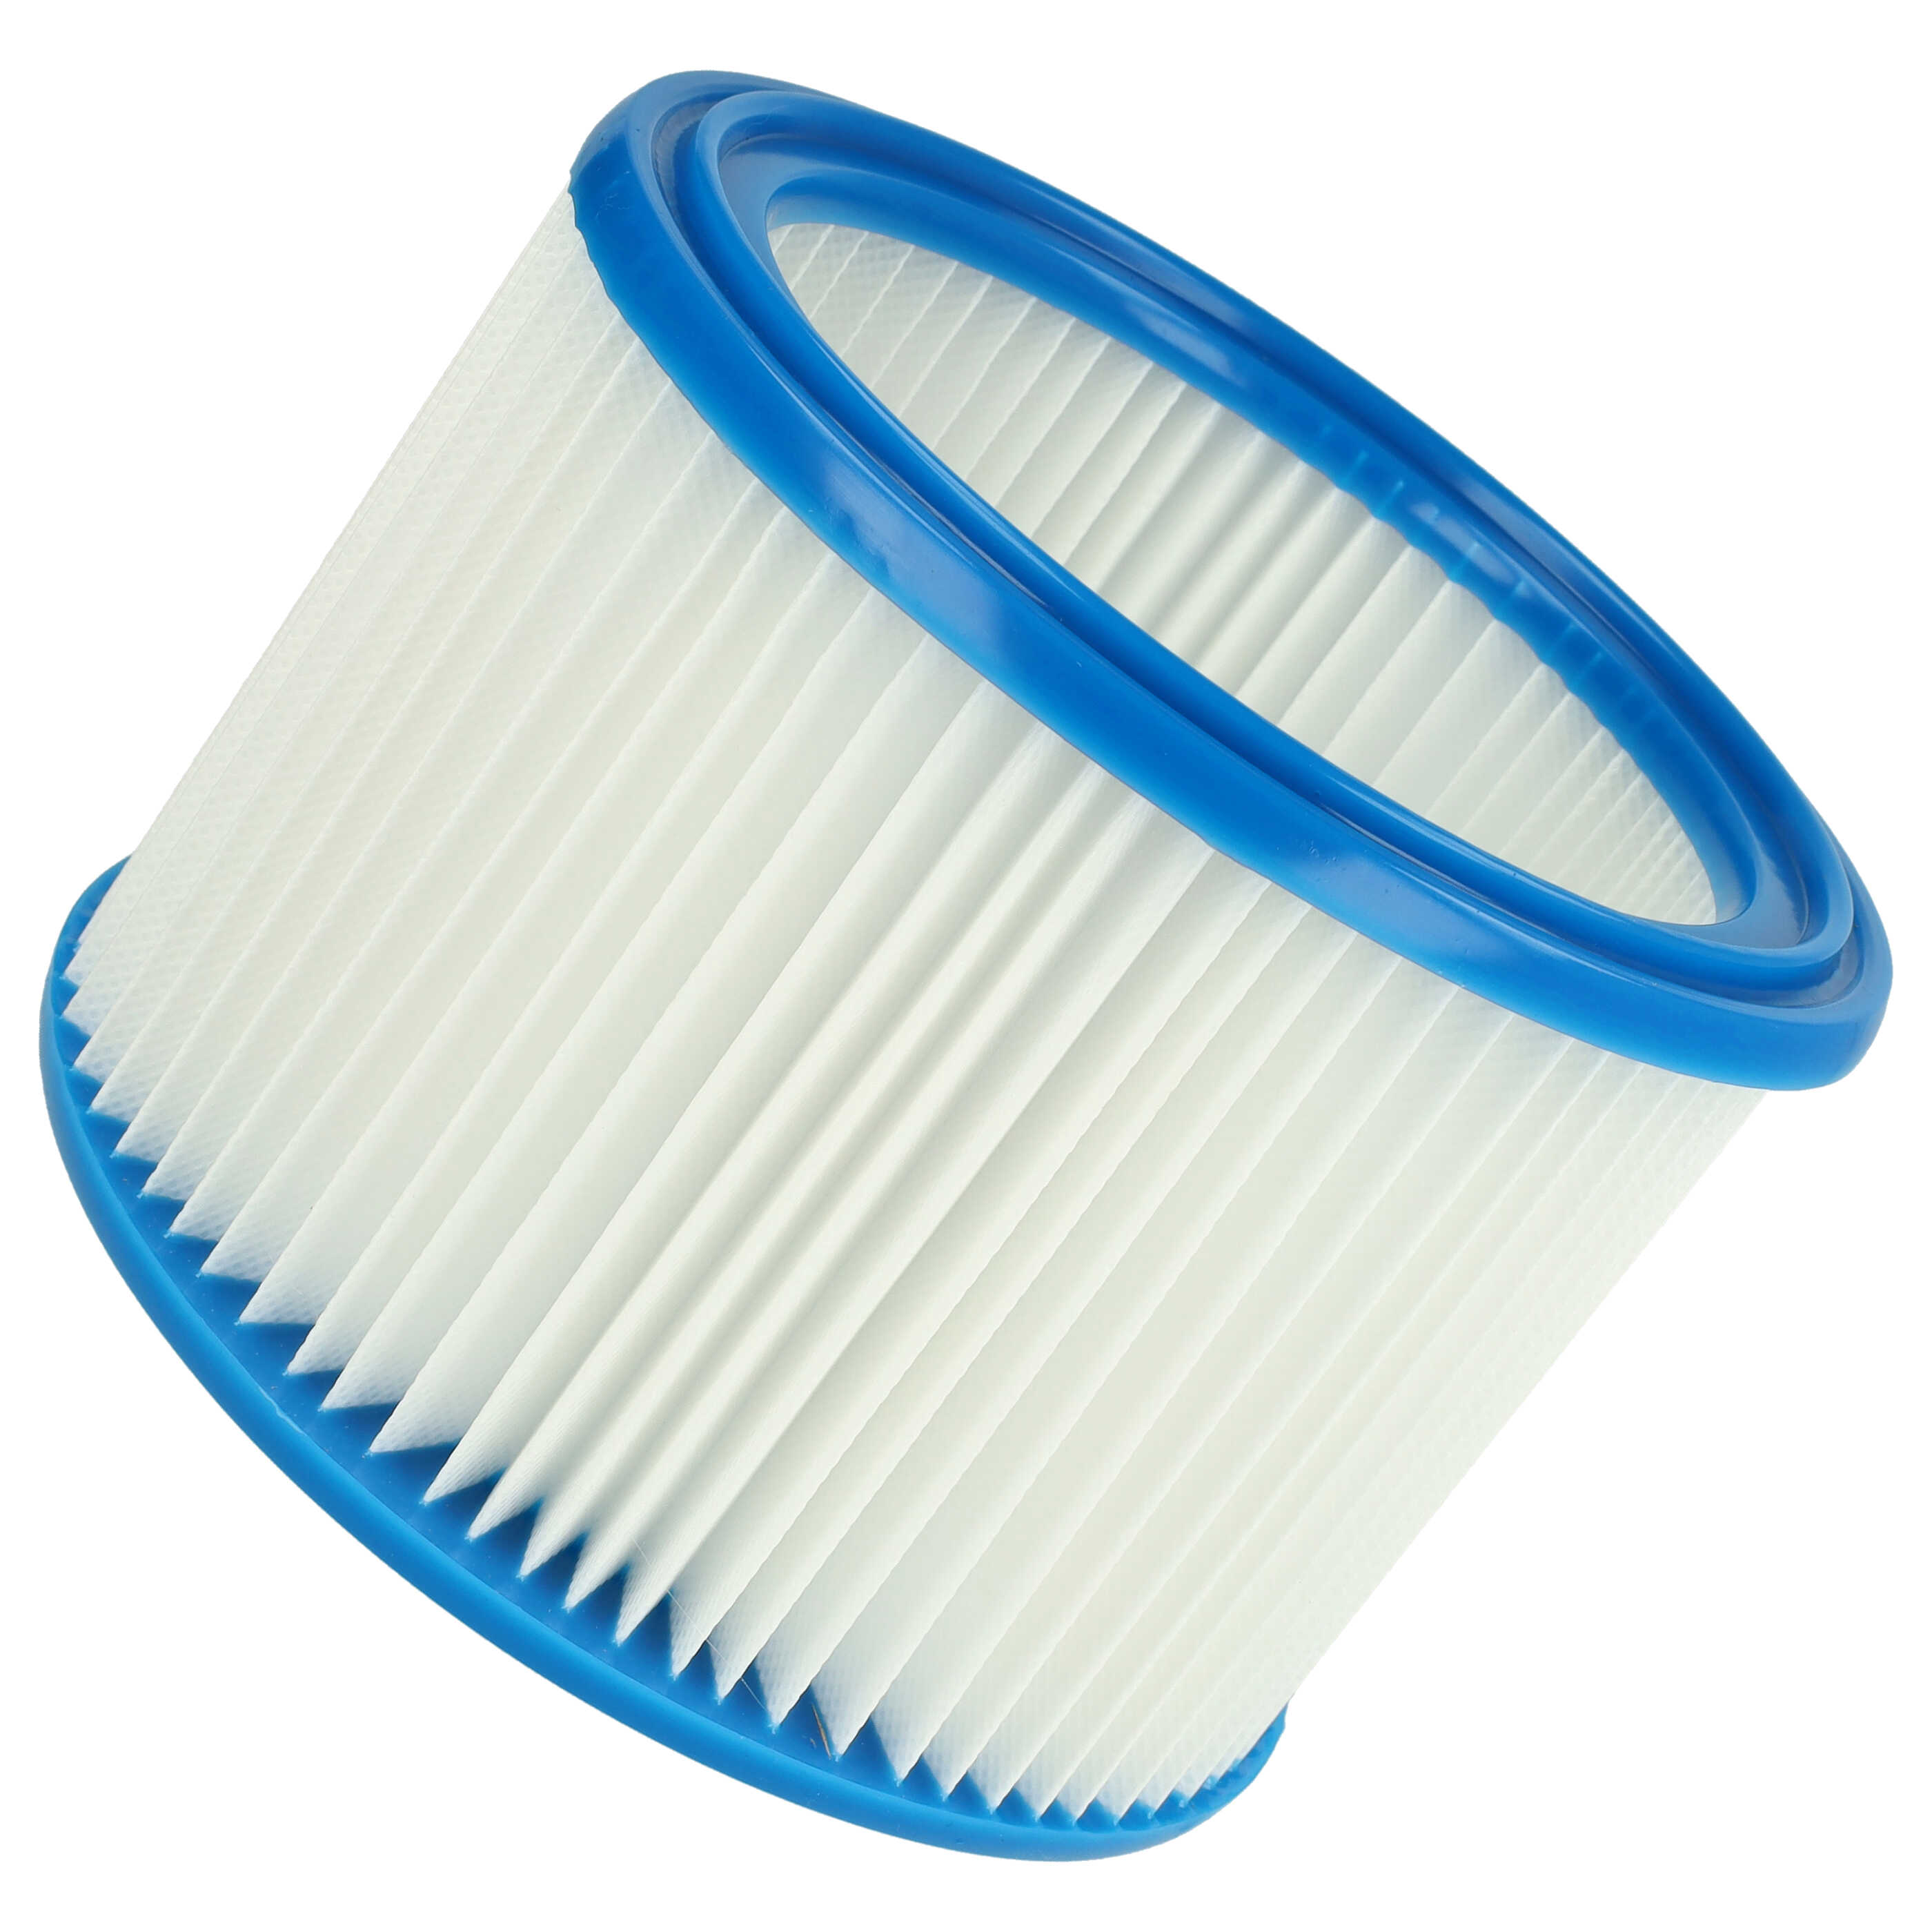 1x round filter replaces Bosch 2607432024 for BoschVacuum Cleaner, white / blue